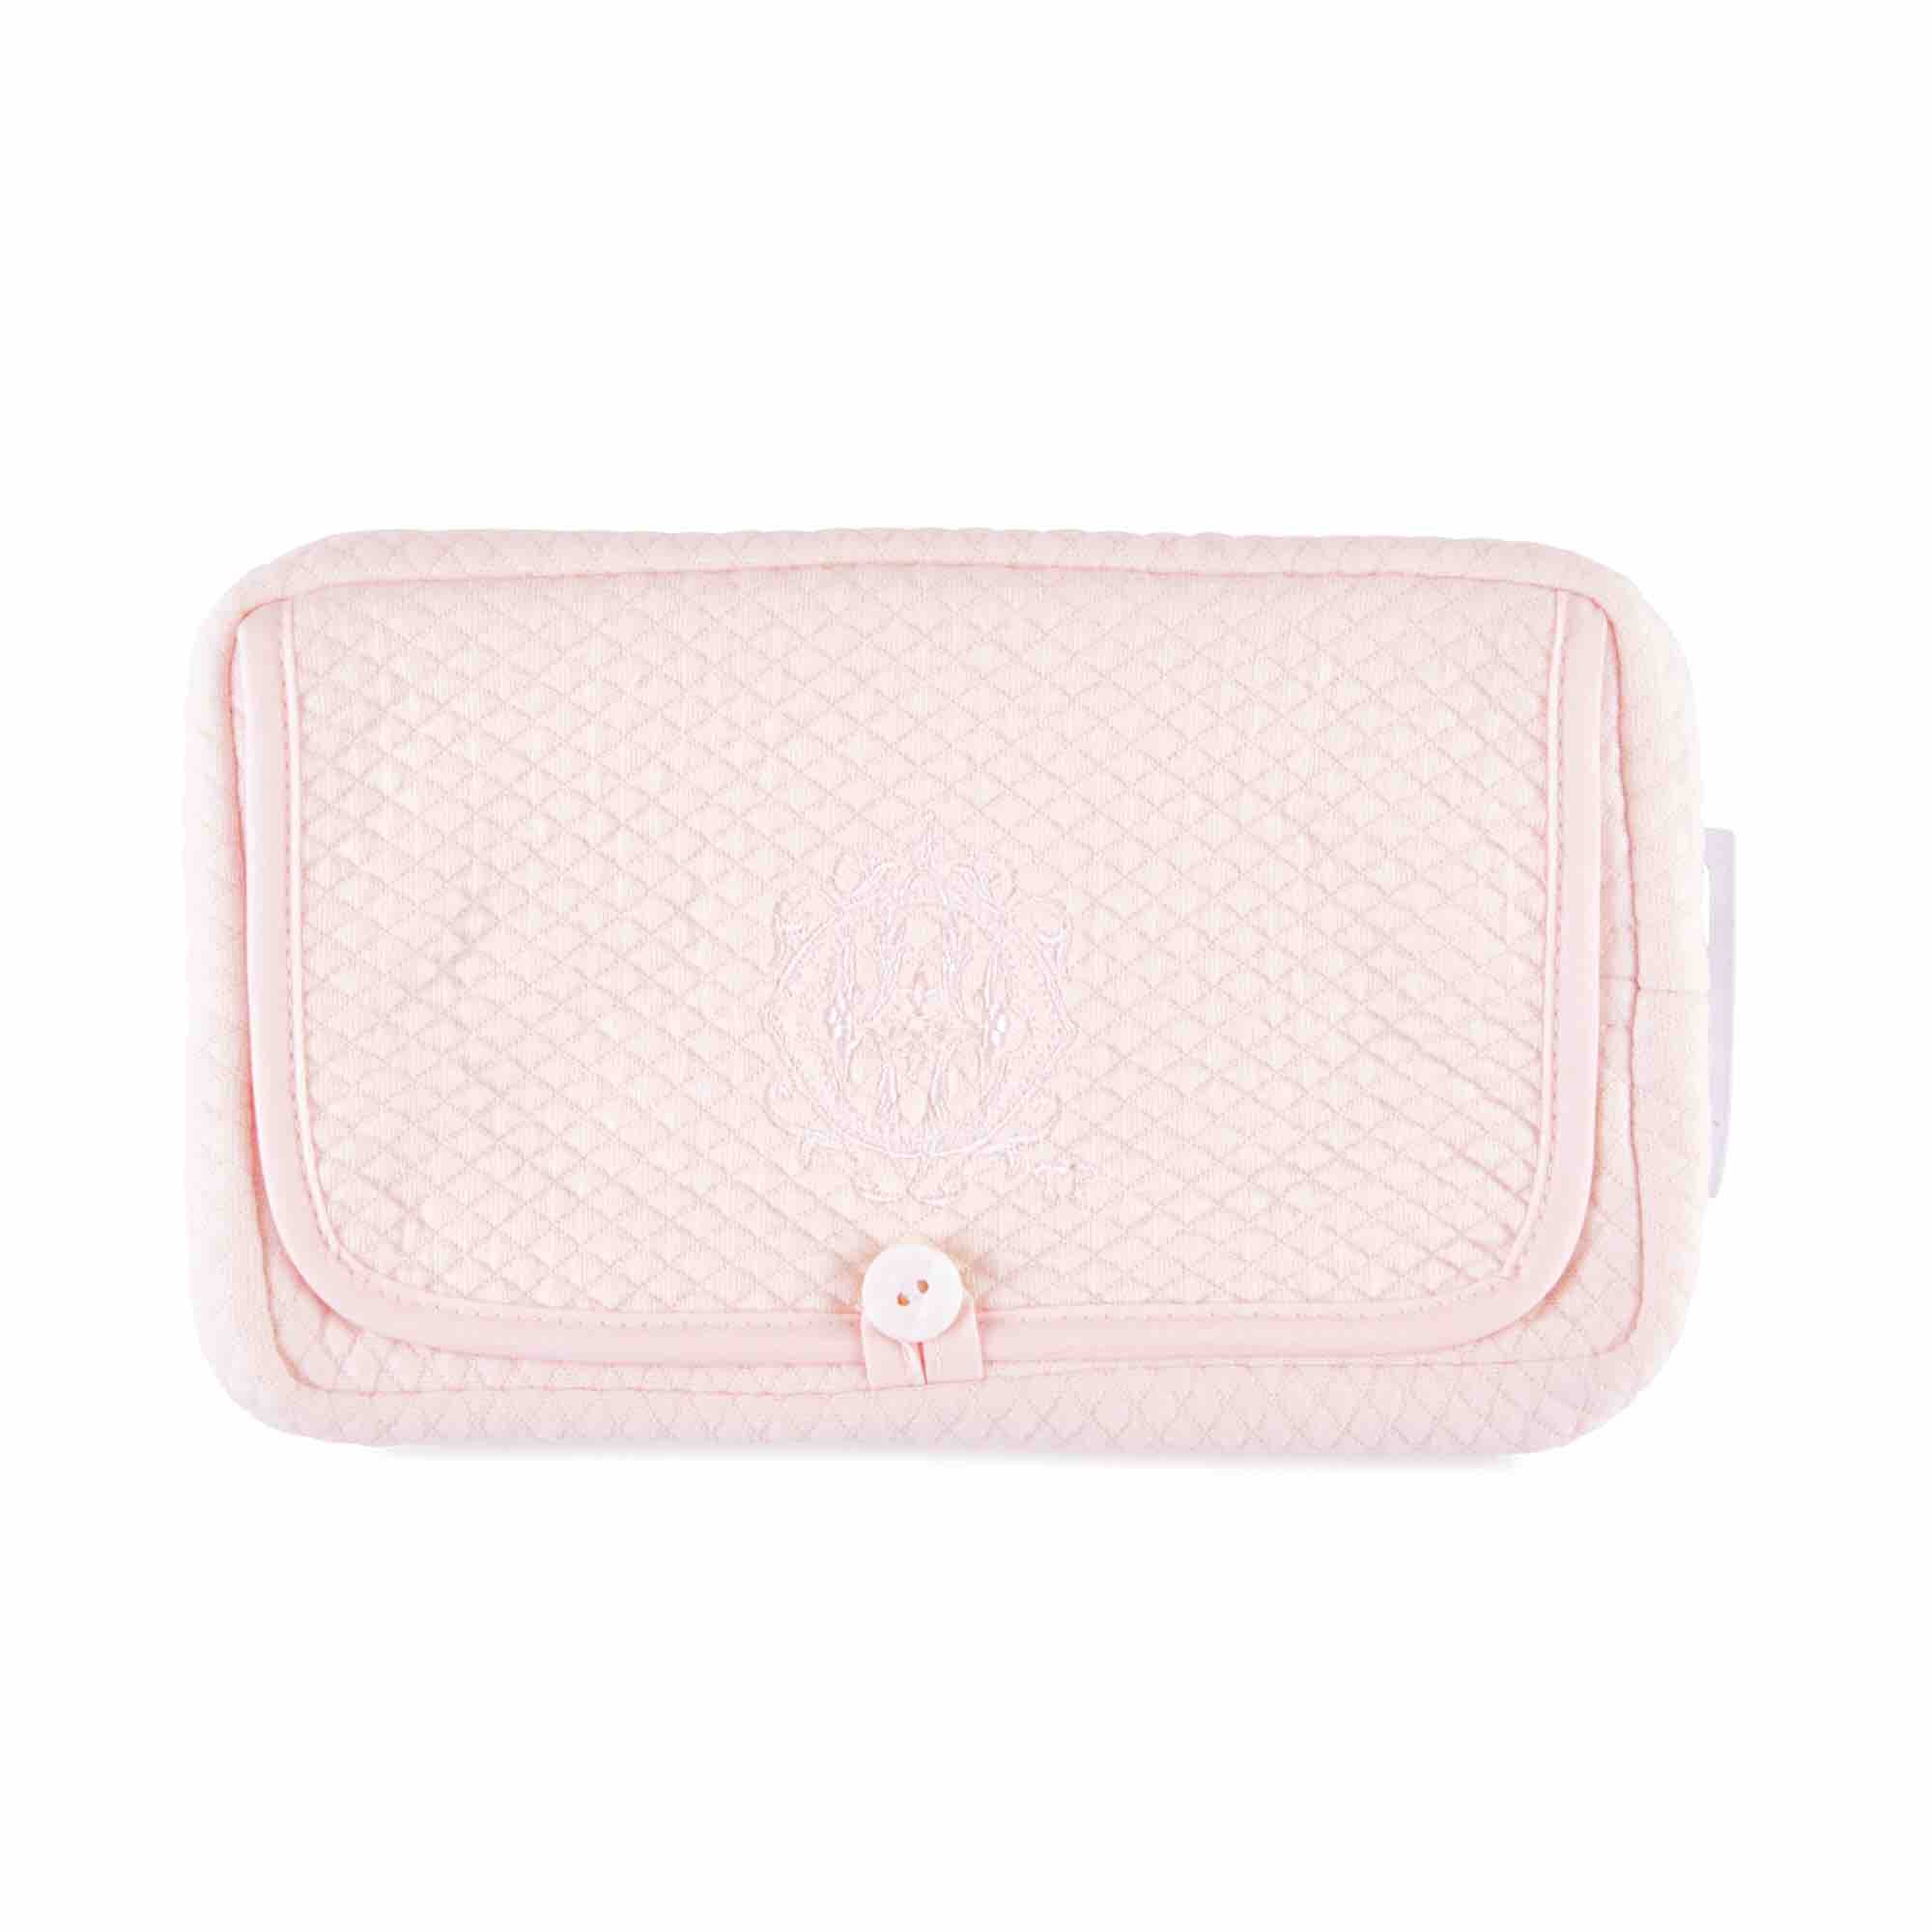 Theophile & Patachou Travel Baby Wipes Cover - Royal Pink